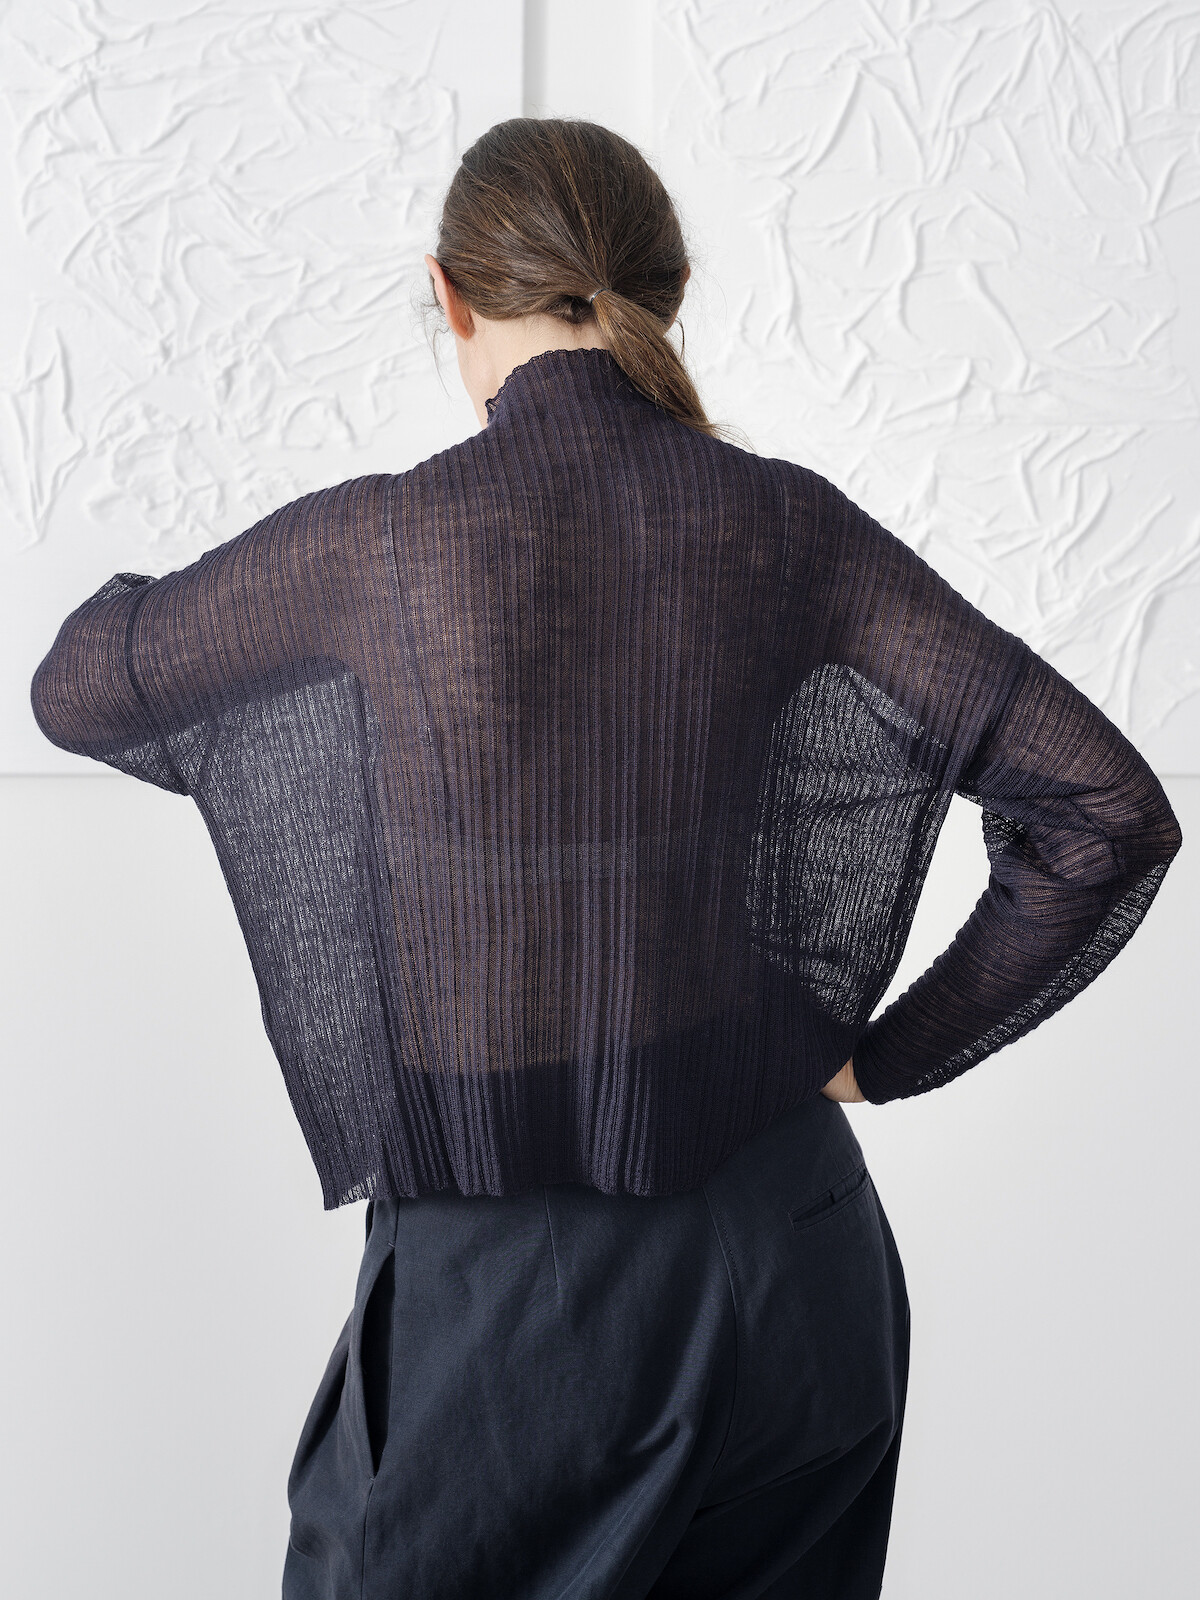 Sheer pleated sweater Image